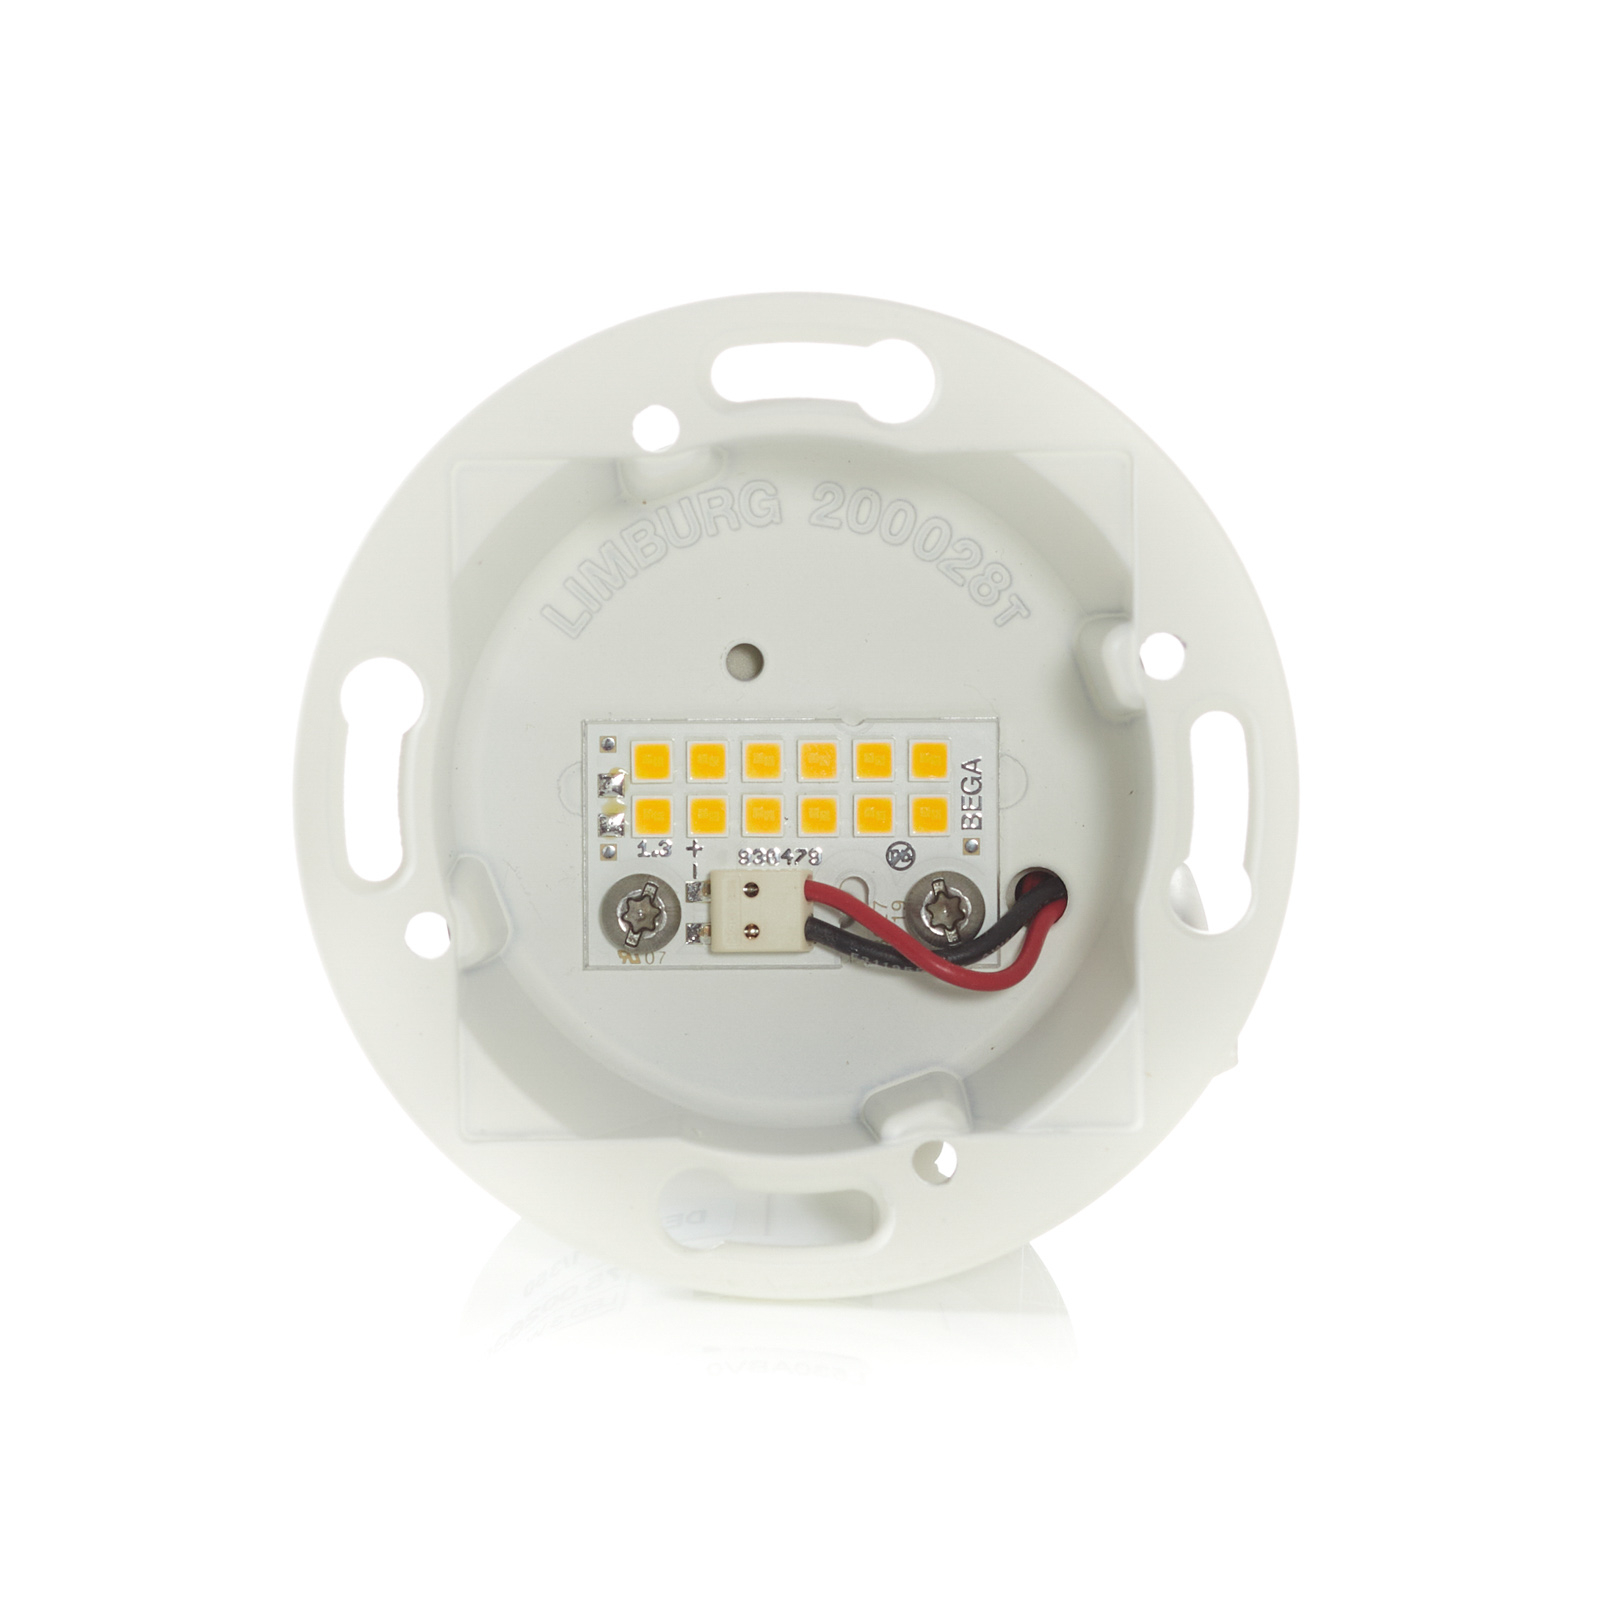 BEGA Accenta wall lamp round ring white 315 lm